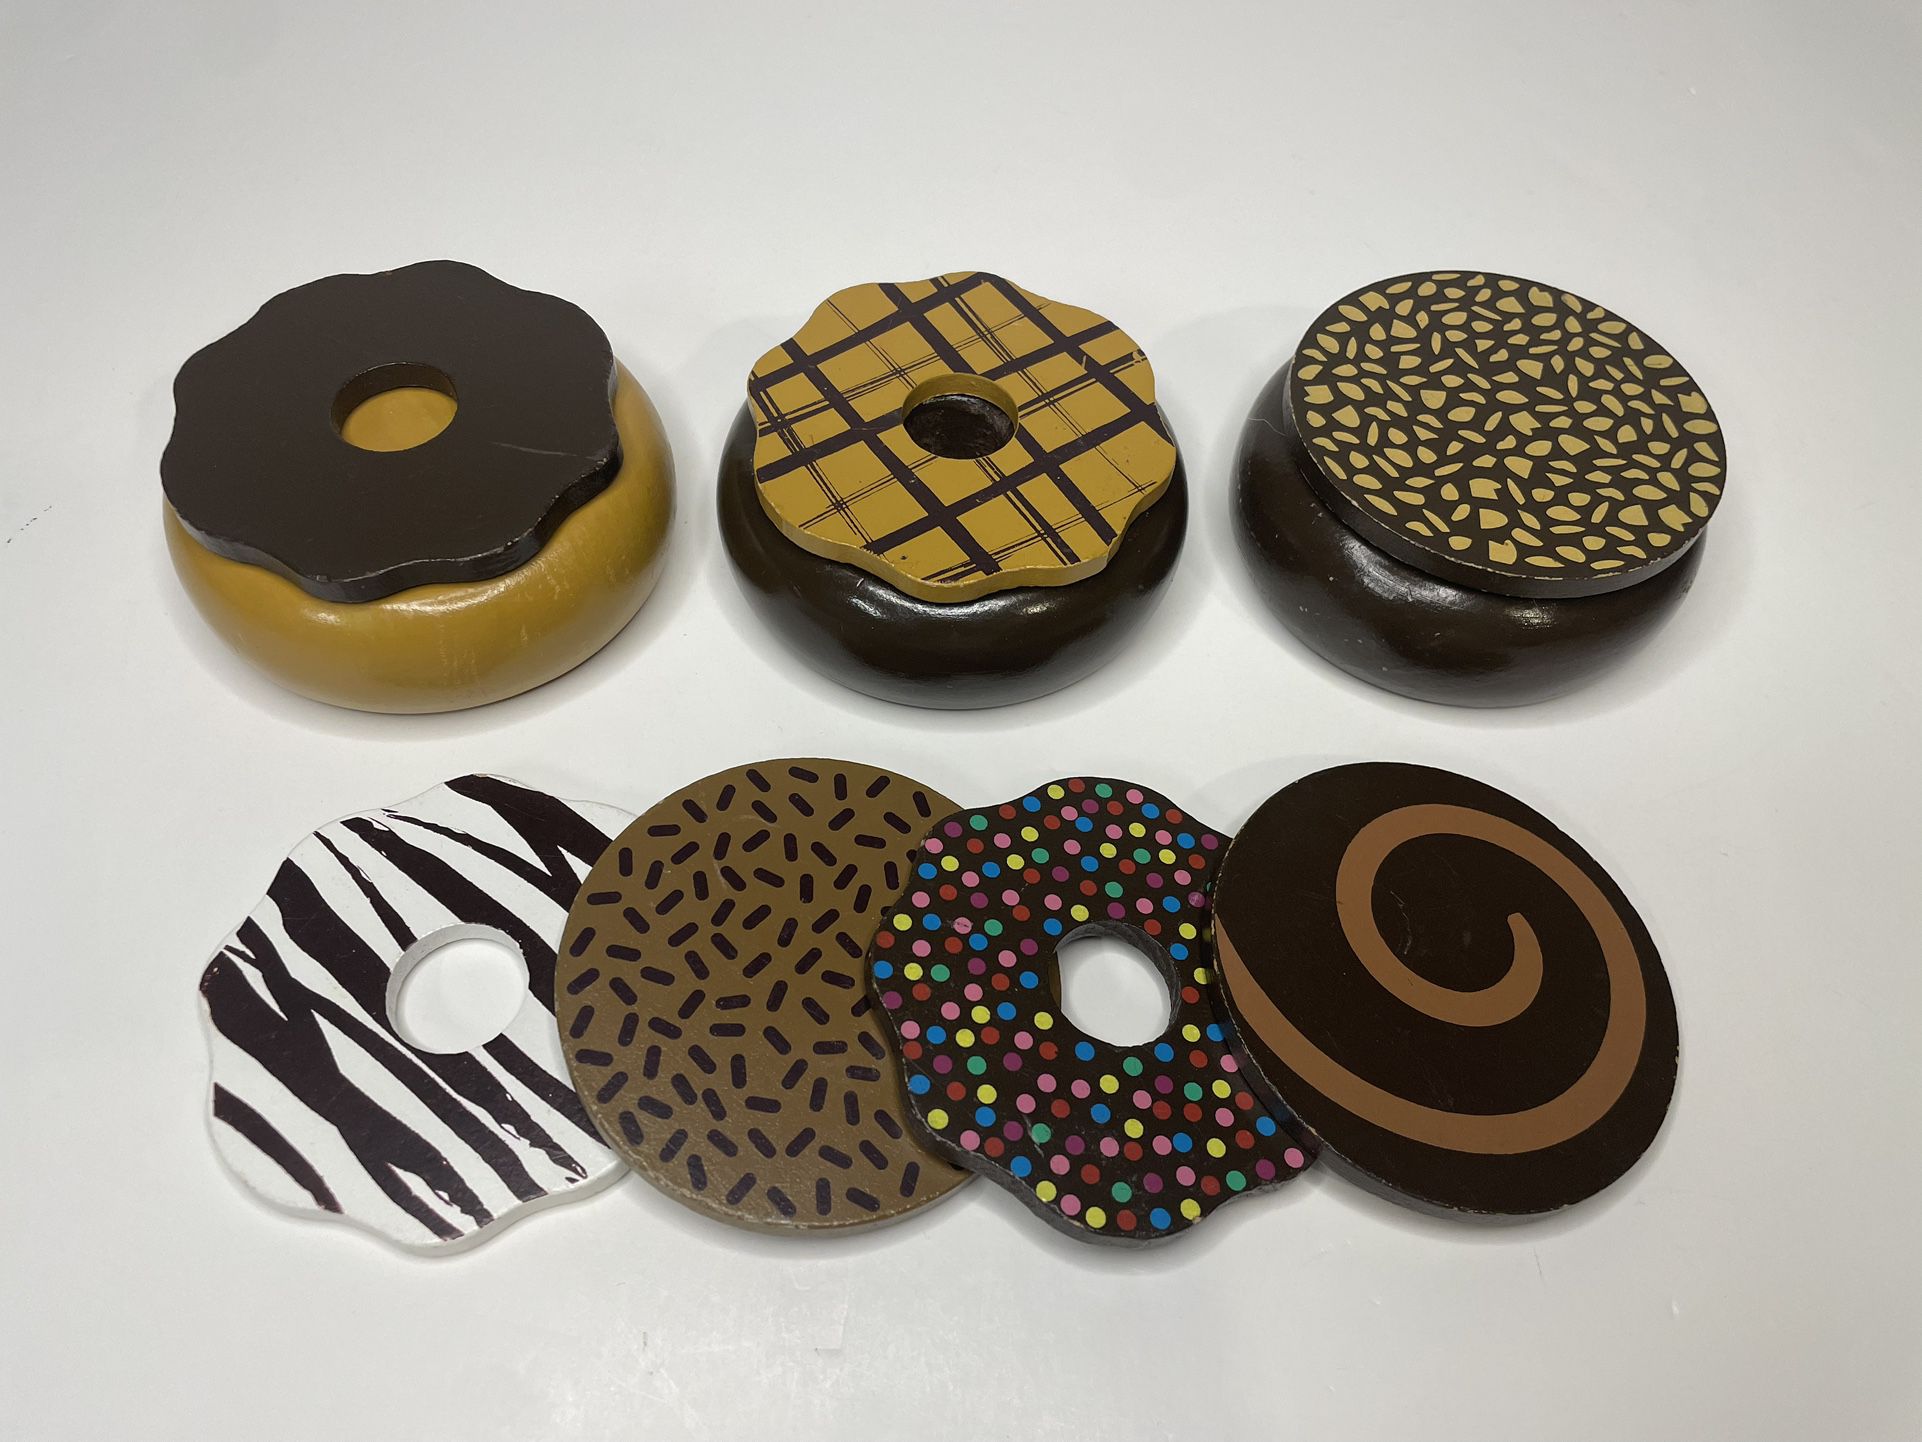 Melissa and Doug wooden donuts